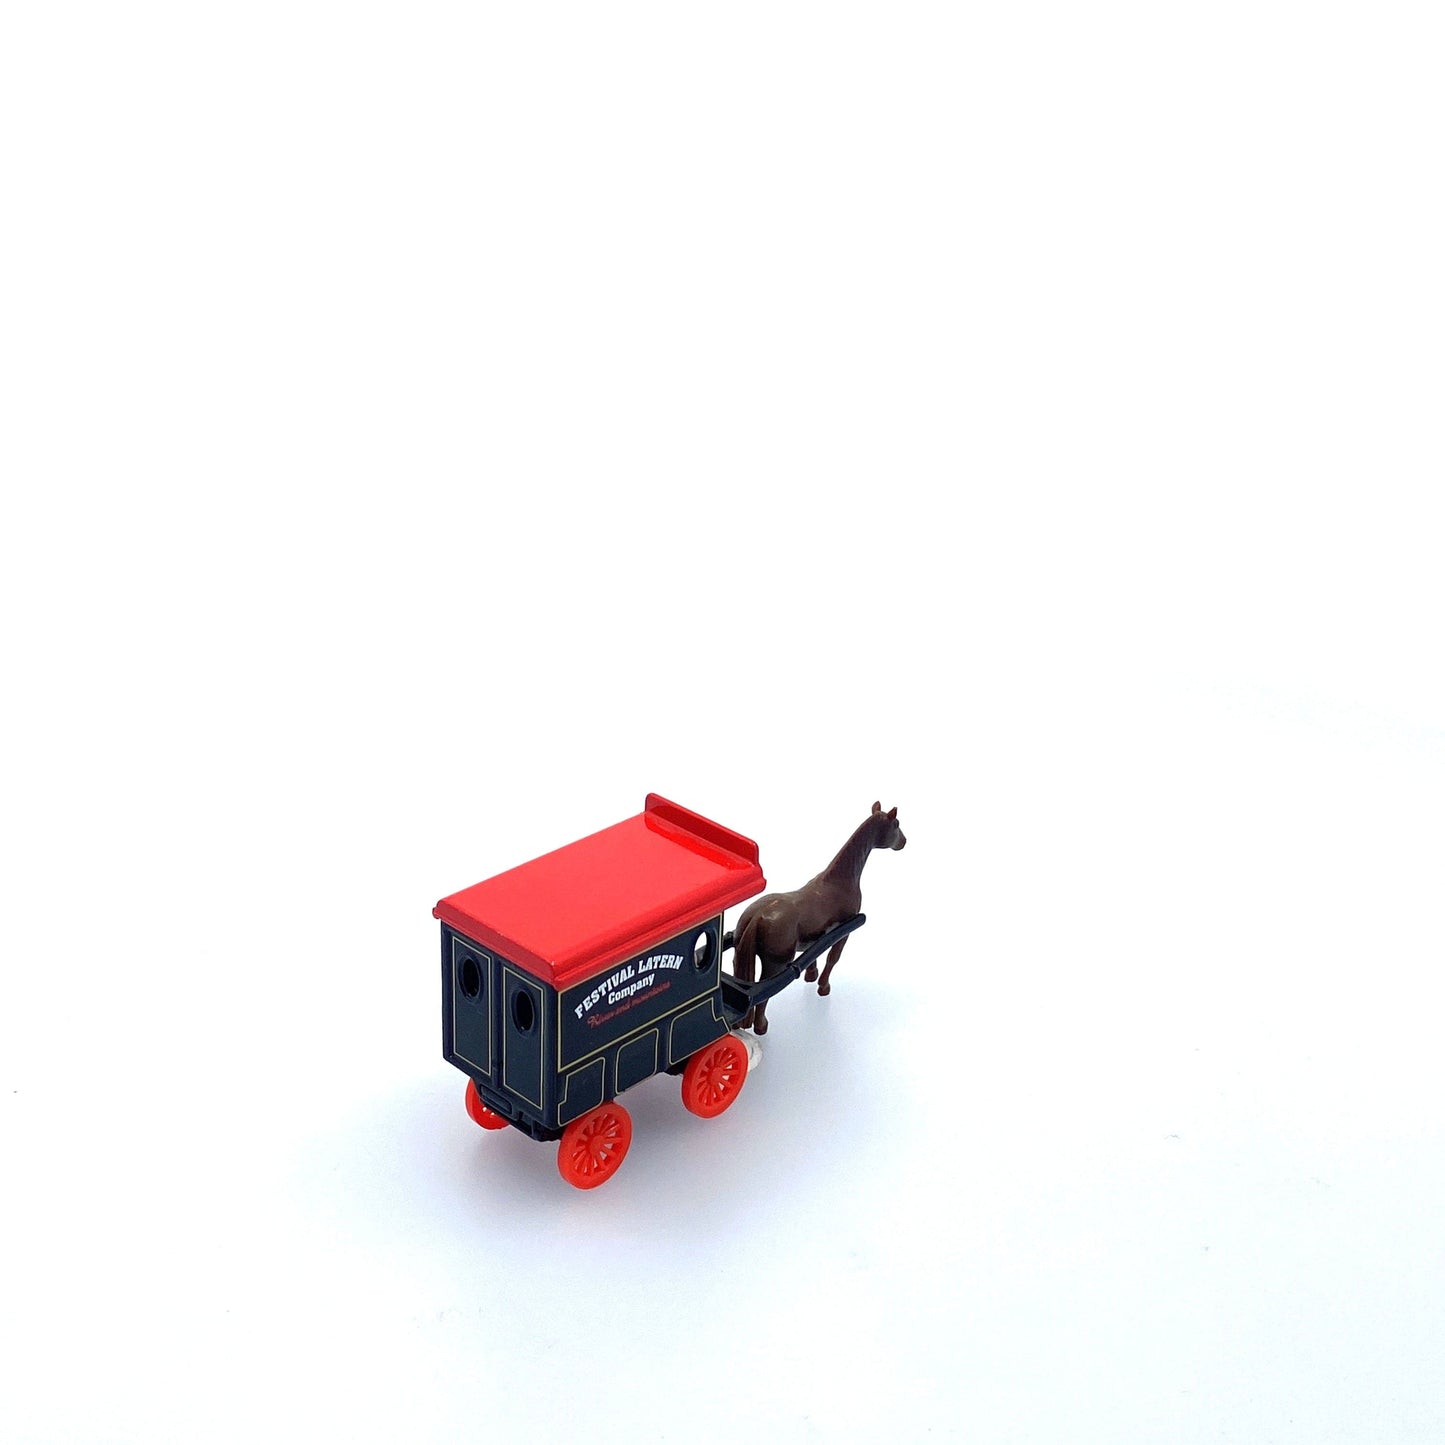 Vintage Olden Days “Festival Lantern Company” Horse-Drawn Delivery Wagon | Diecast Toy Vehicle